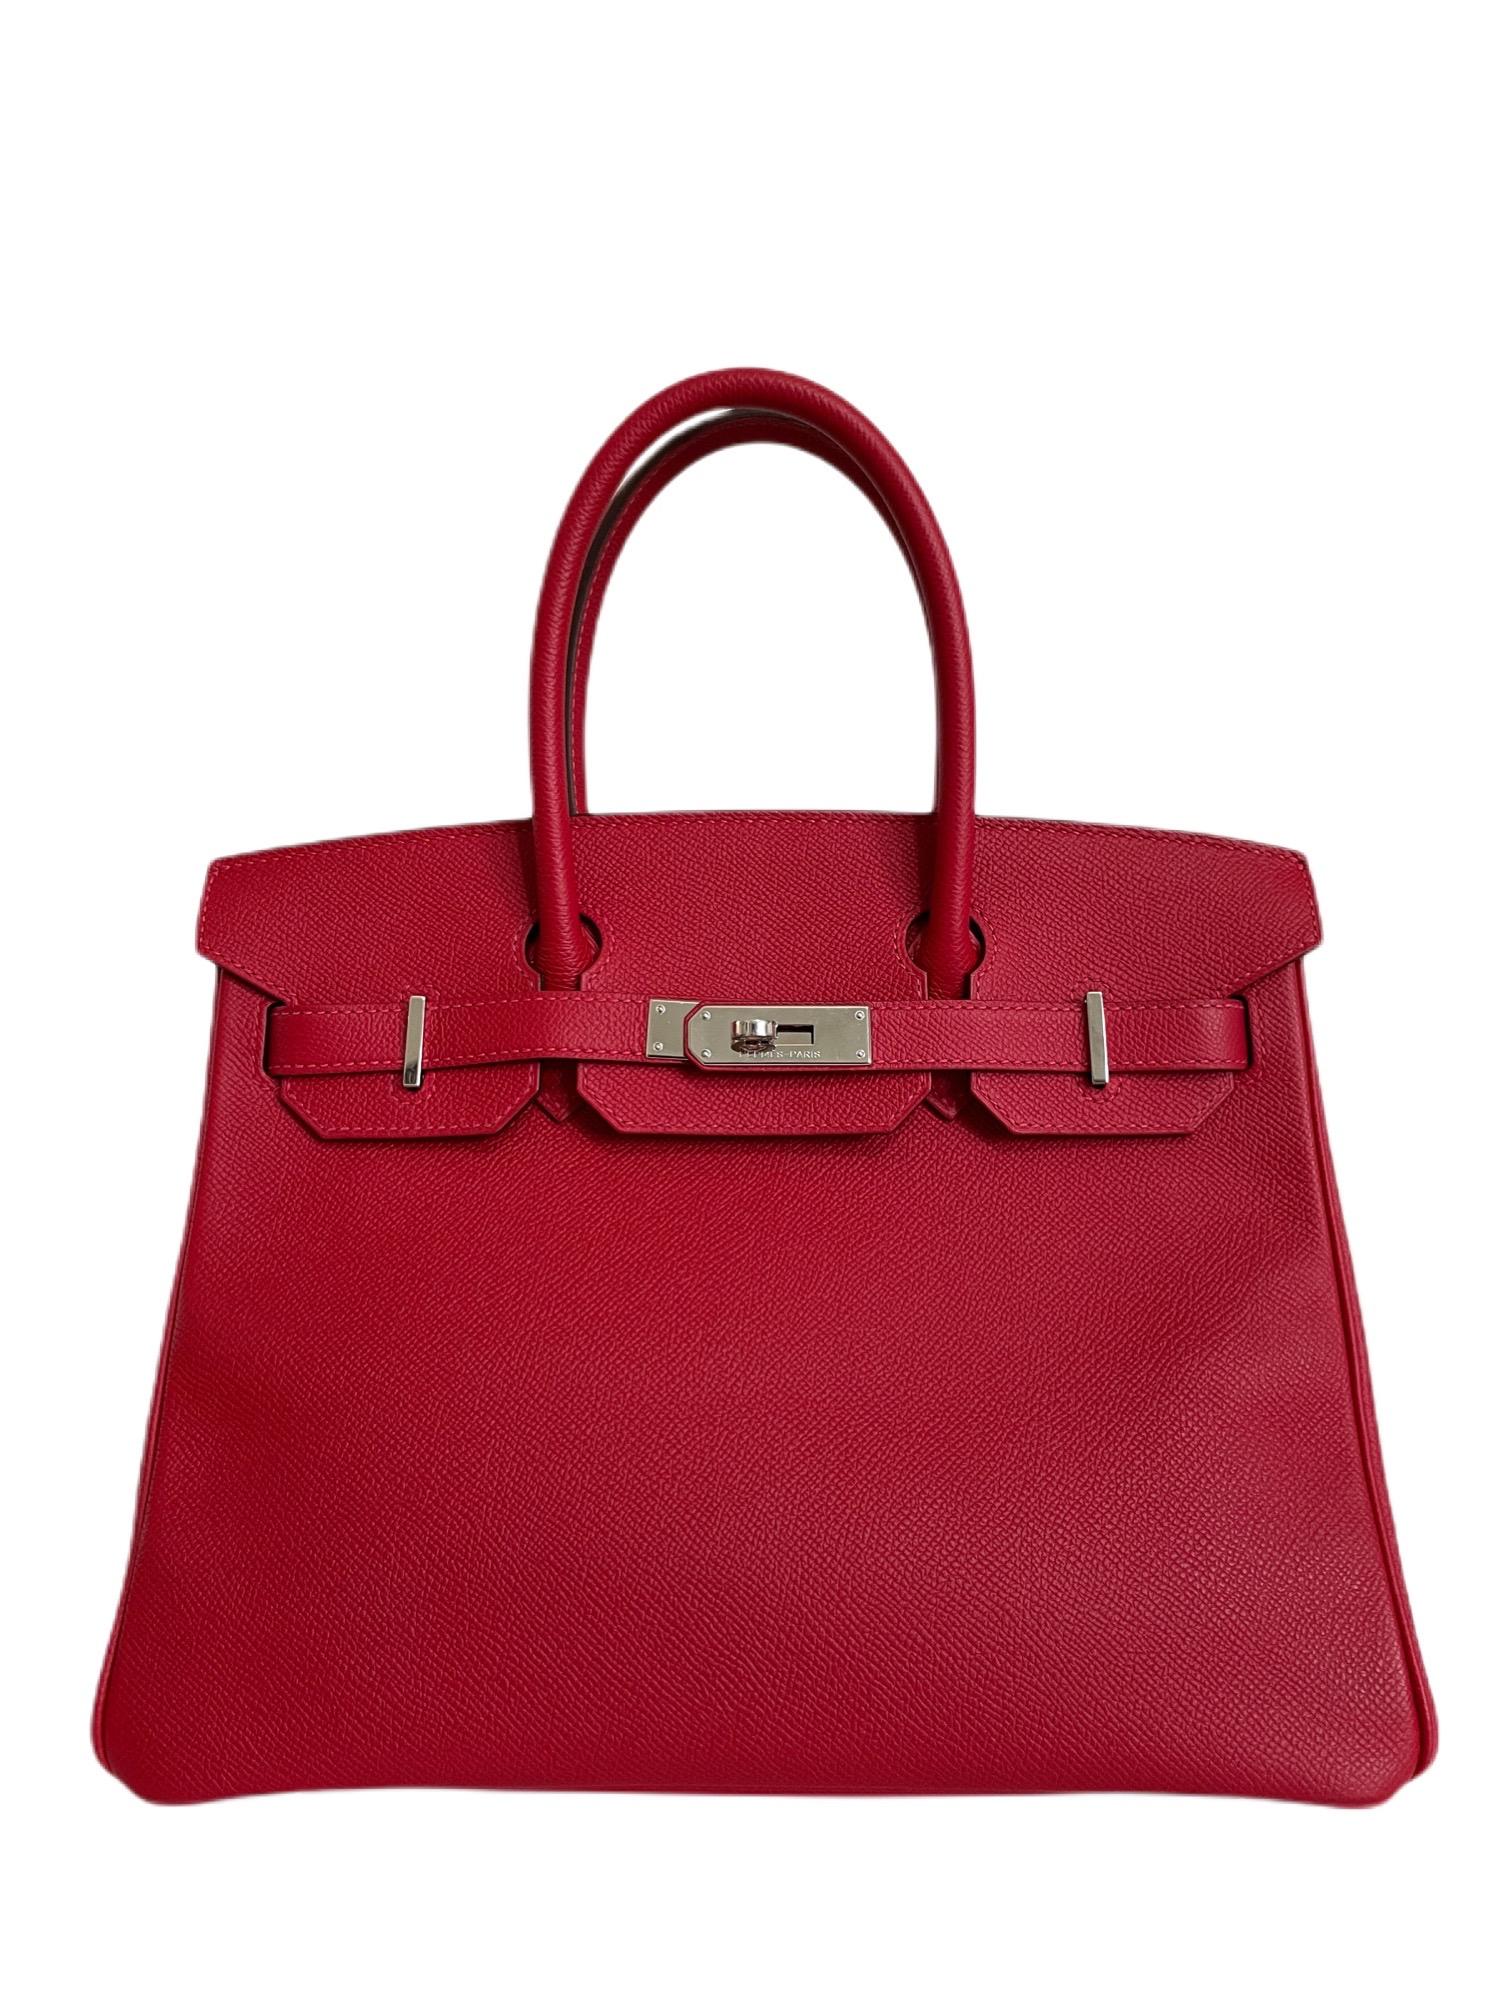 Hermes Birkin 30 Rouge Casaque Red Epsom Palladium Hardware. Excellent Condition, light hairlines on hardware. Excellent corners and structure. 

Shop with Confidence from Lux Addicts. Authenticity Guaranteed! 